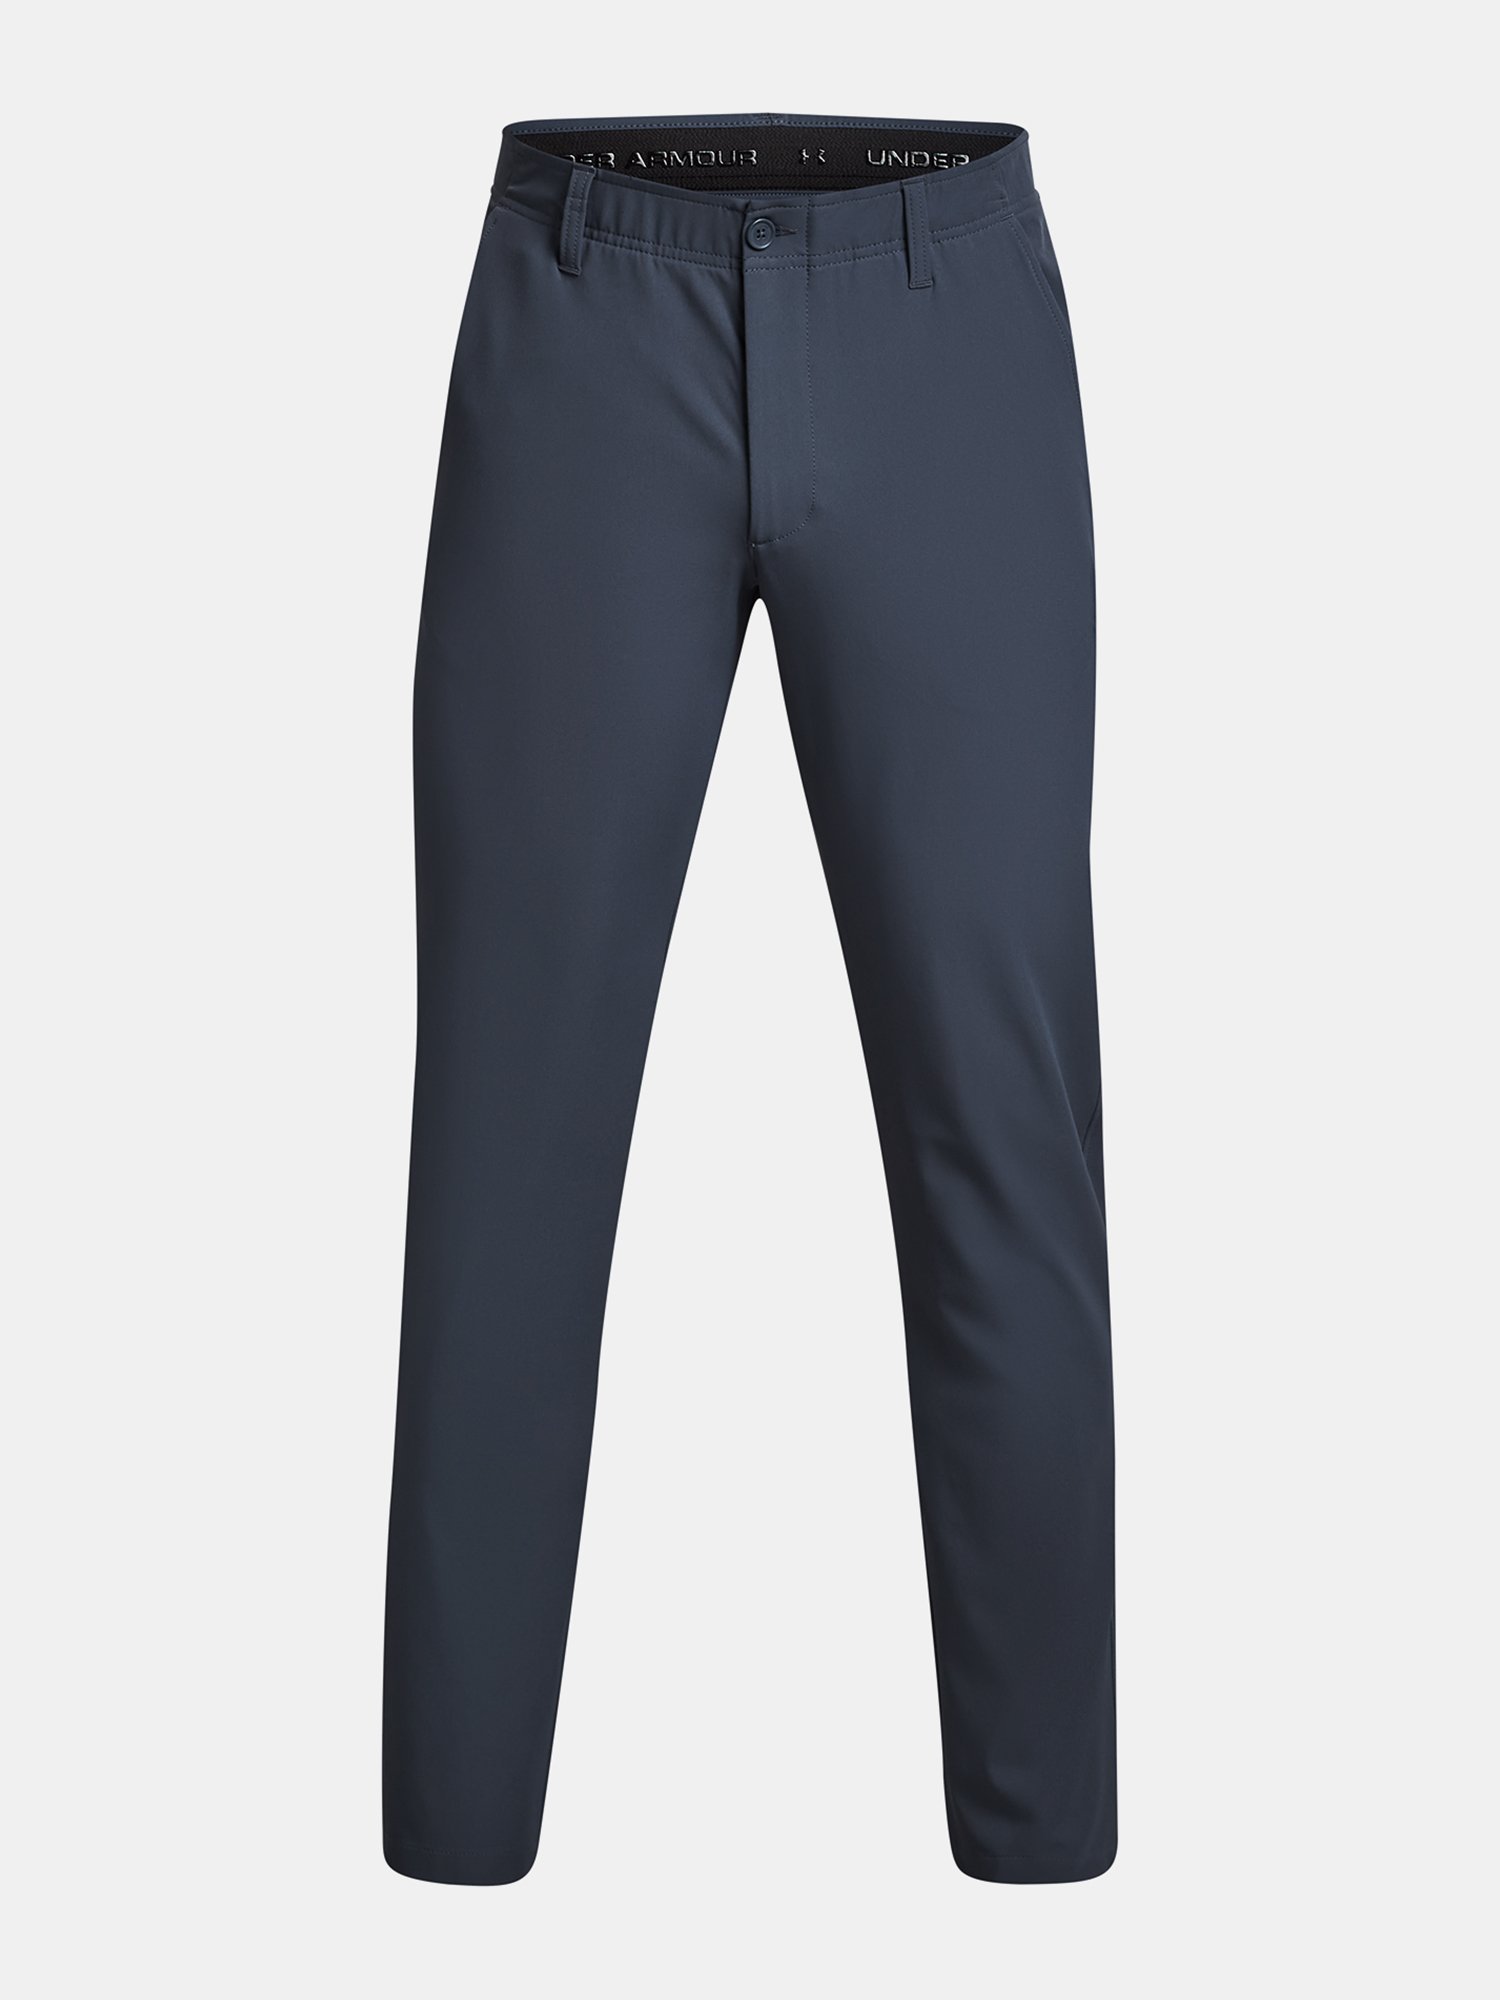 Nohavice Under Armour UA Drive Tapered Pant - sivá